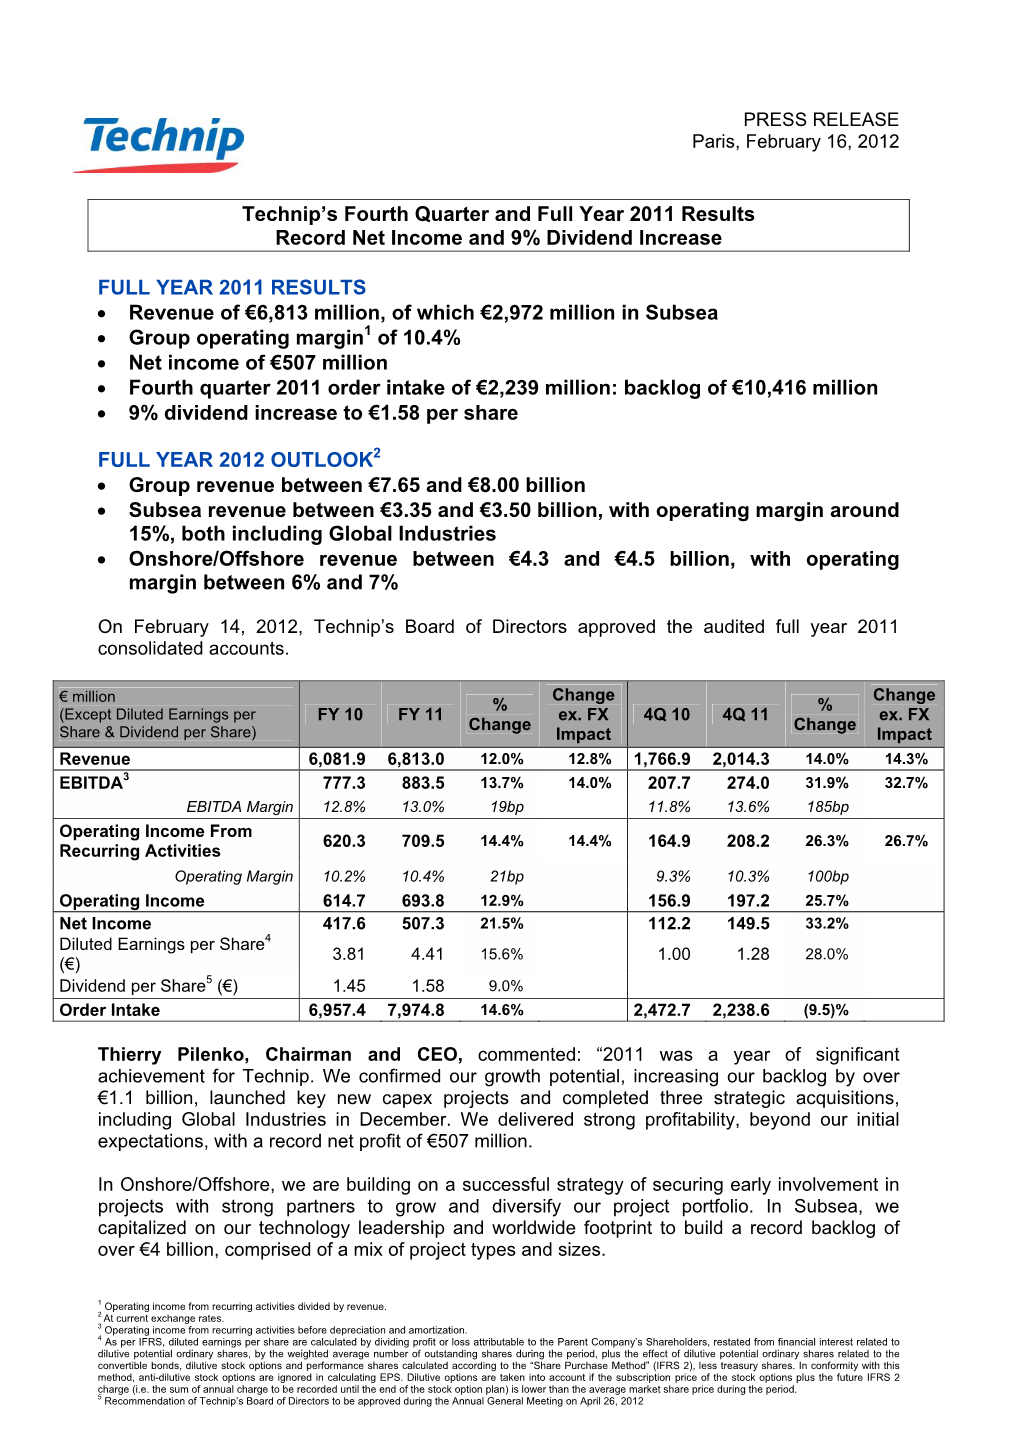 Technip's Fourth Quarter and Full Year 2011 Results Record Net Income and 9% Dividend Increase FULL YEAR 2011 RESULTS • Reve